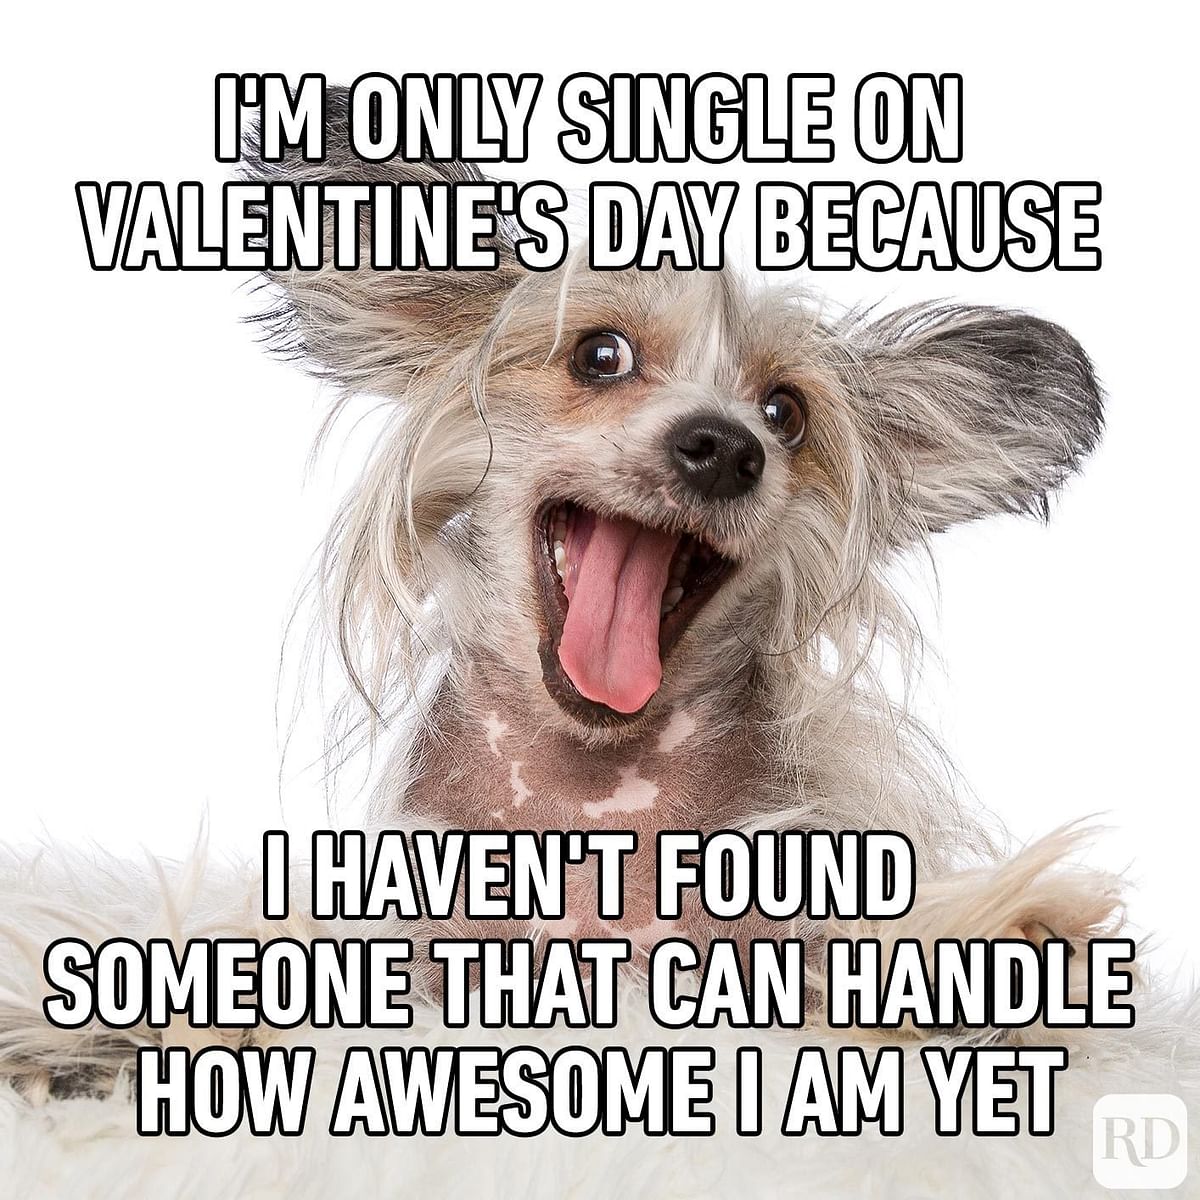 Valentine S Day 2022 Jokes Funny Memes Images Quotes For Singles Happy Valentine S Day